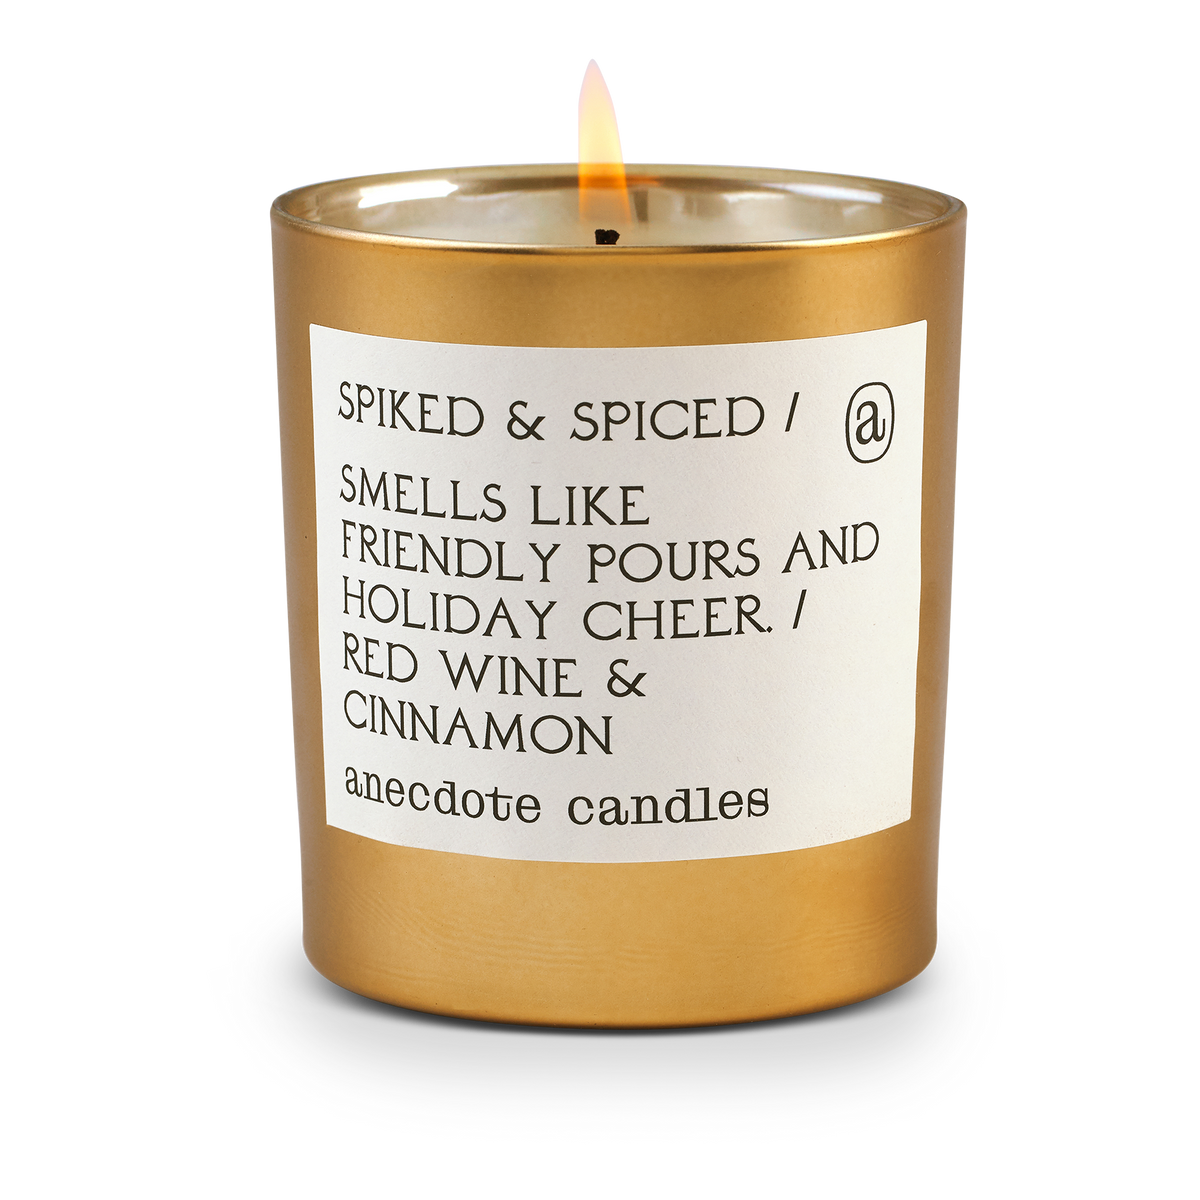 Spiked & Spiced - Anecdote Candles